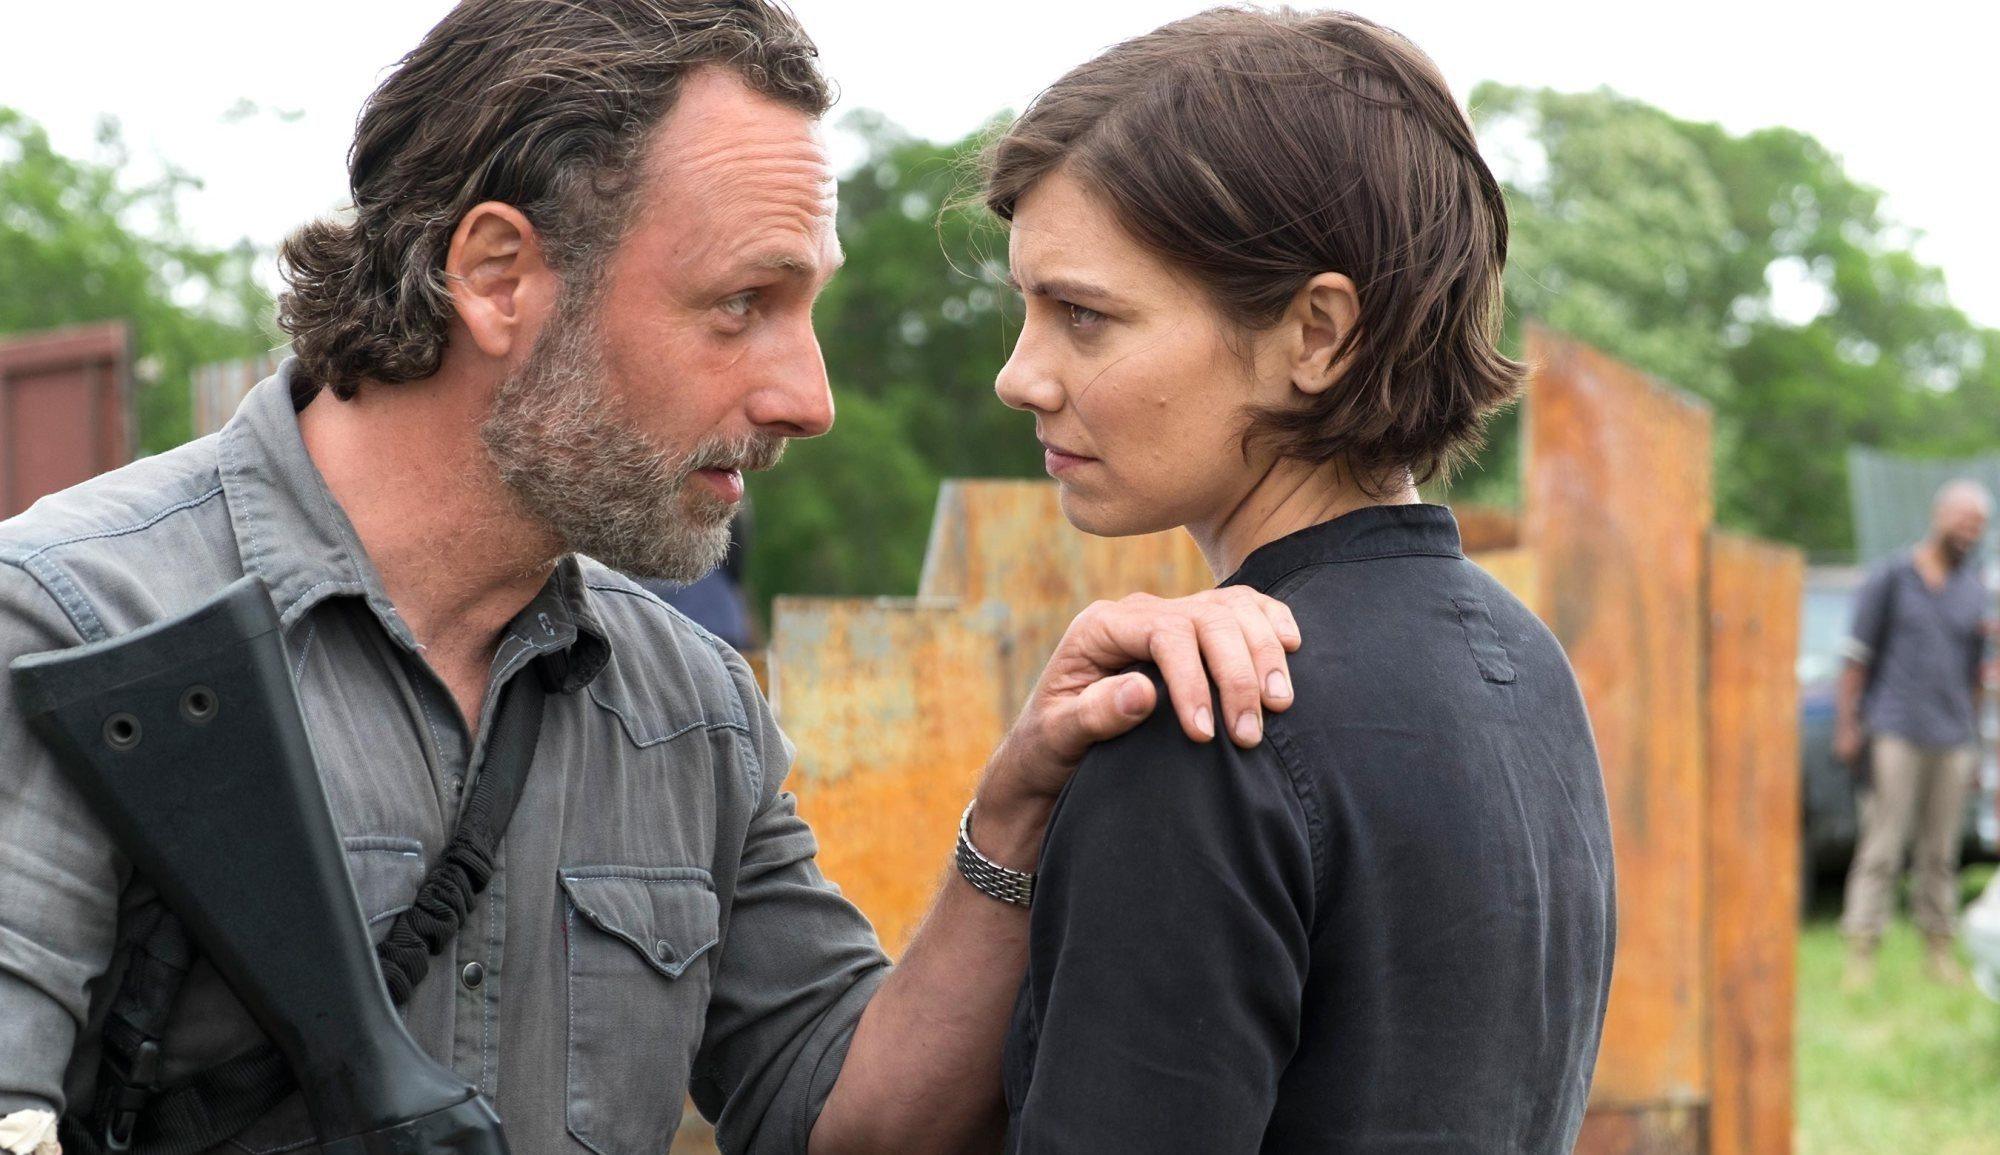 Rick puts his hand on Maggie's shoulder and holds a gun in another hand